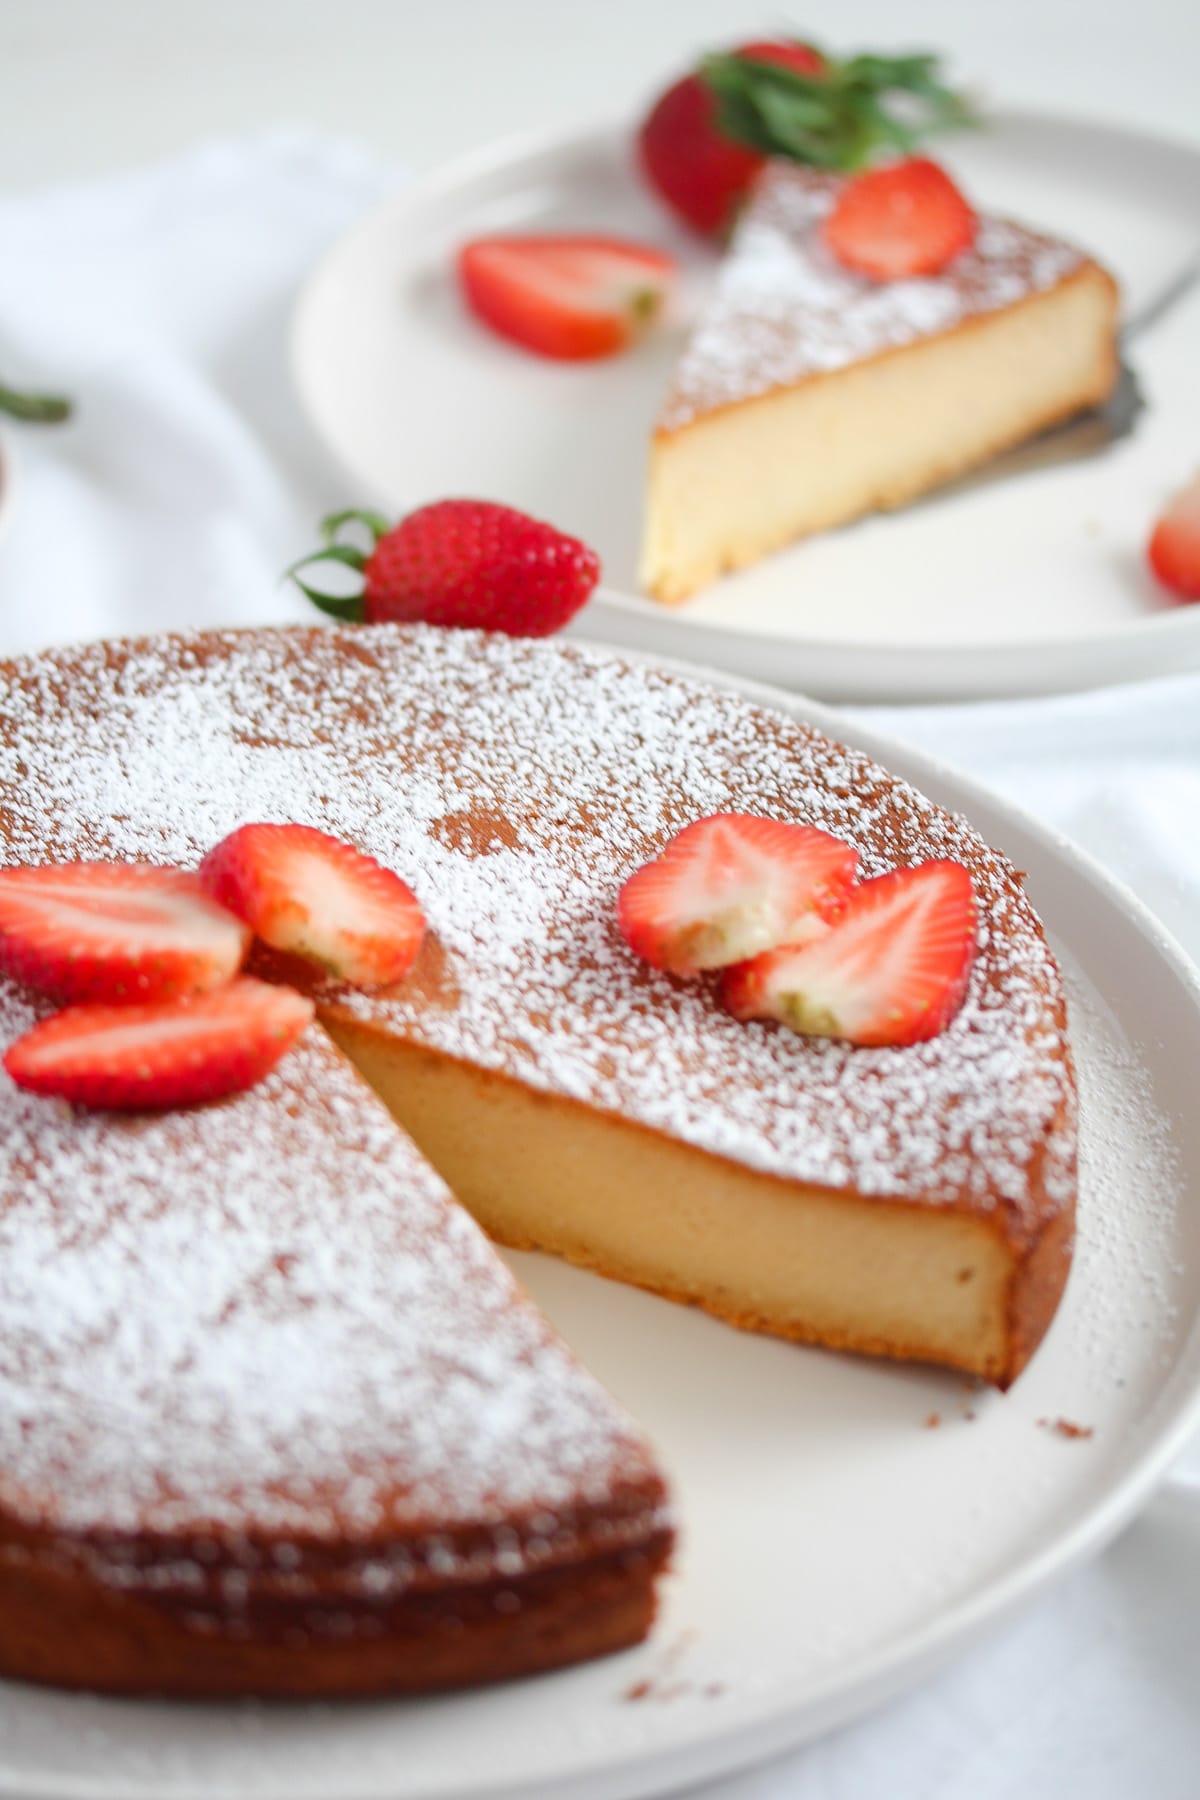 marzipan cake decorated with icing sugar and strawberries.